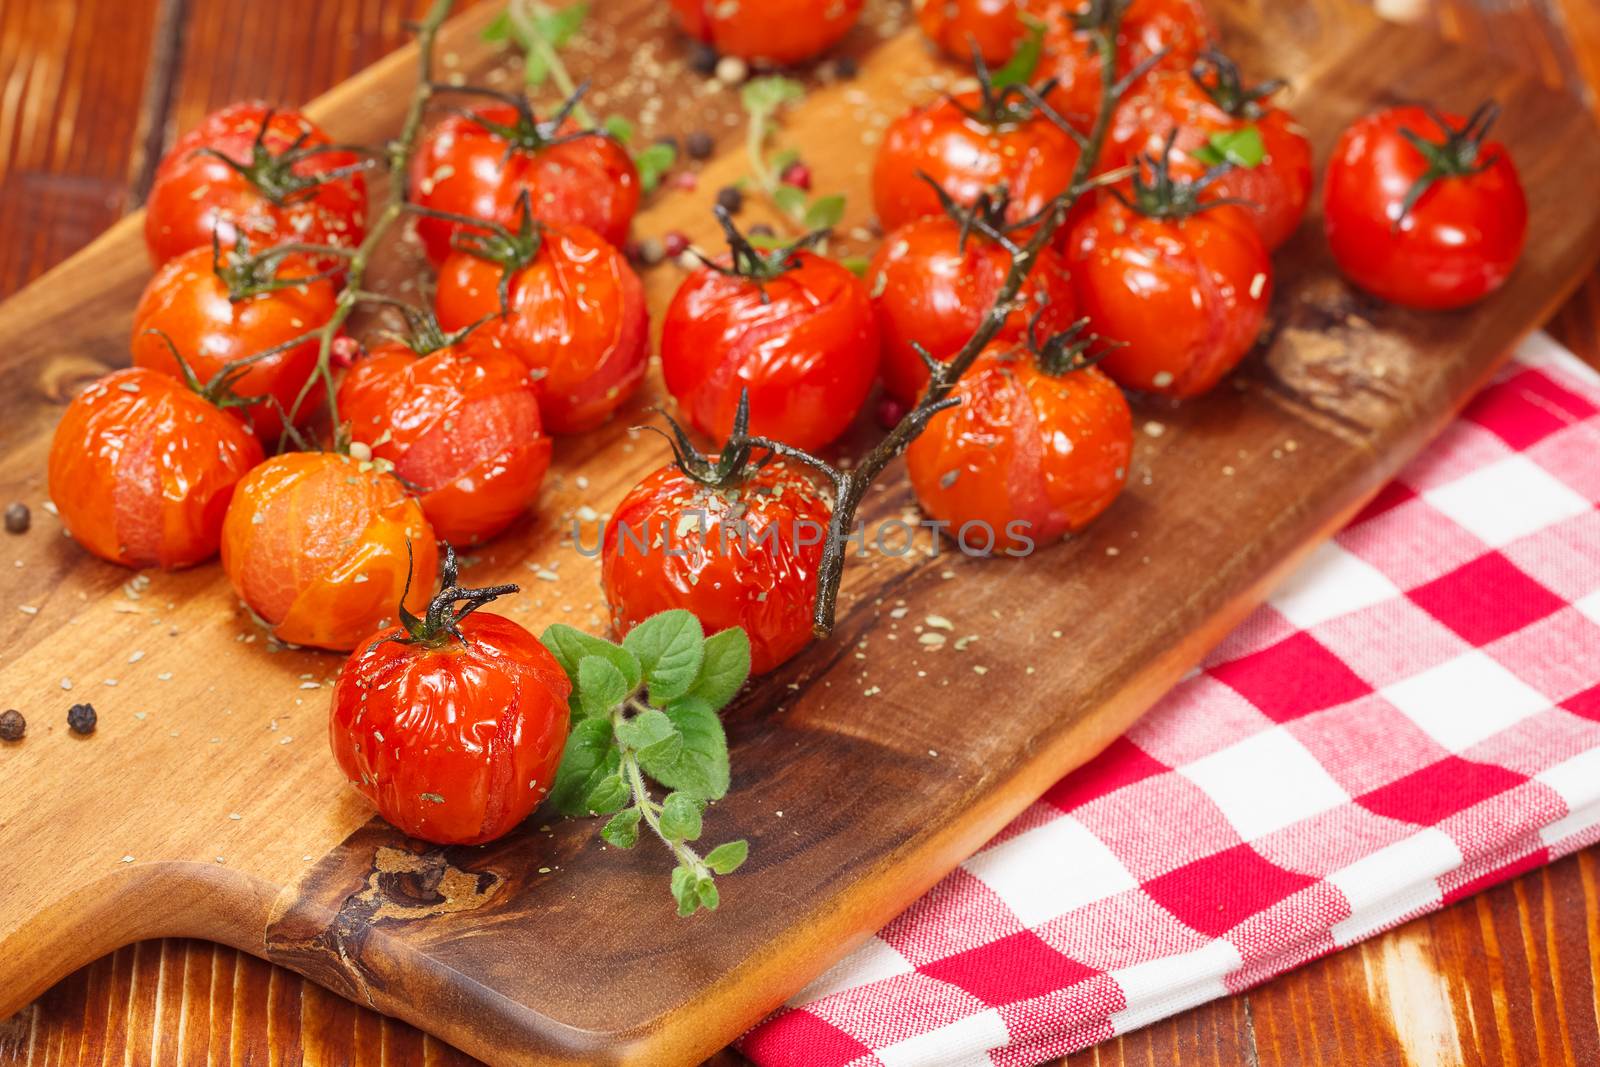 Roasted Tomatoes by Slast20